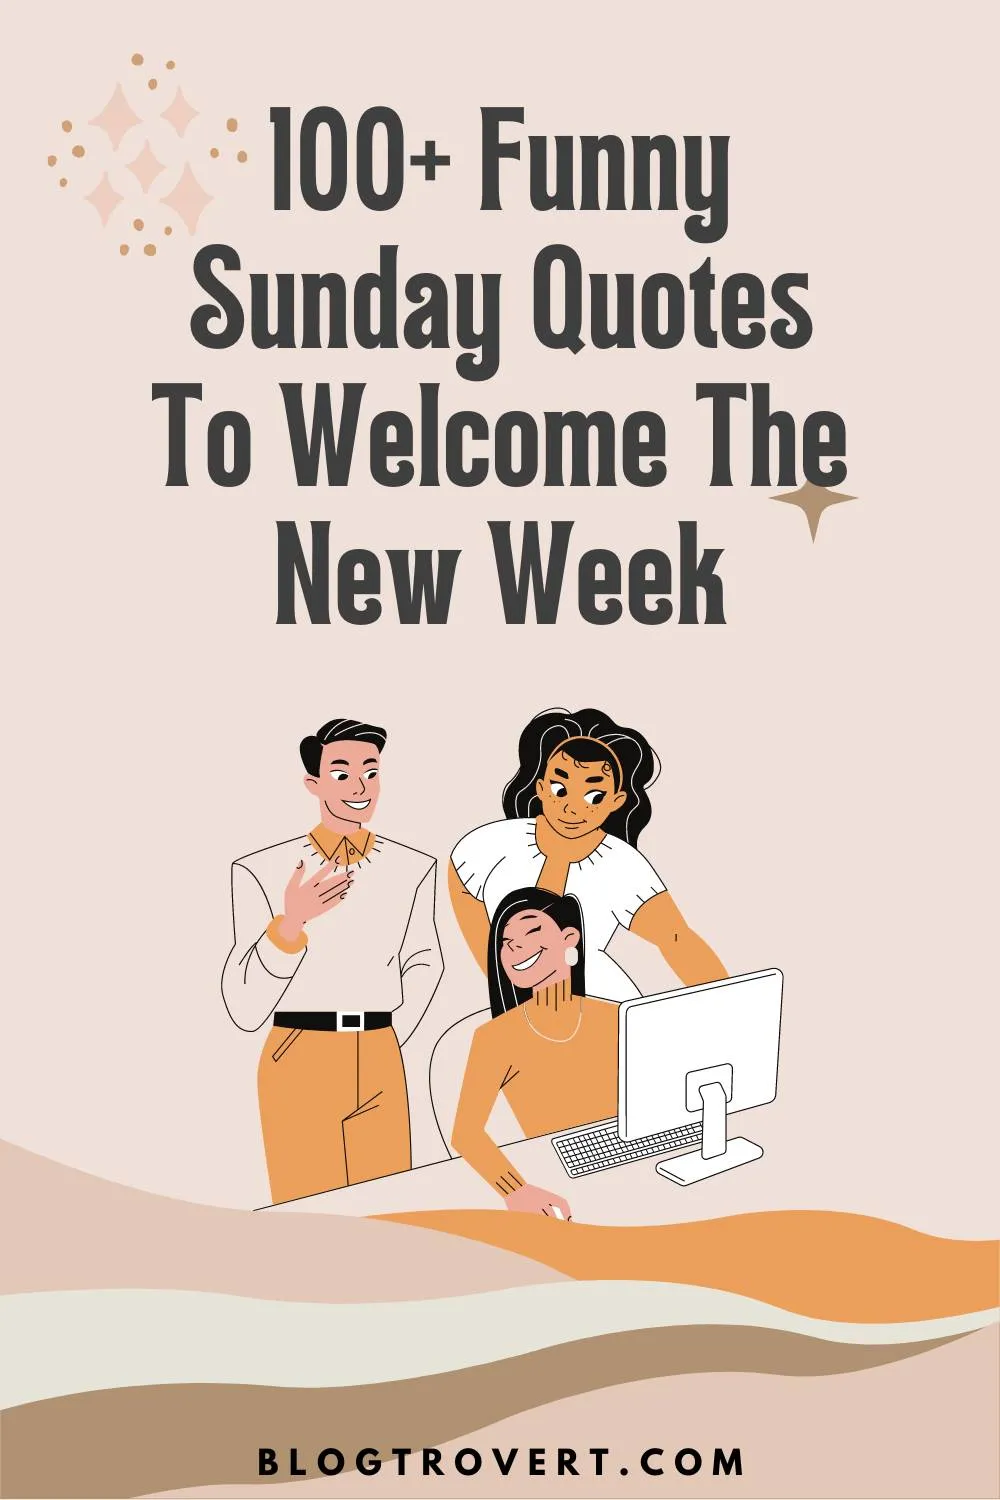 108 funny Sunday quotes to welcome the new week 1